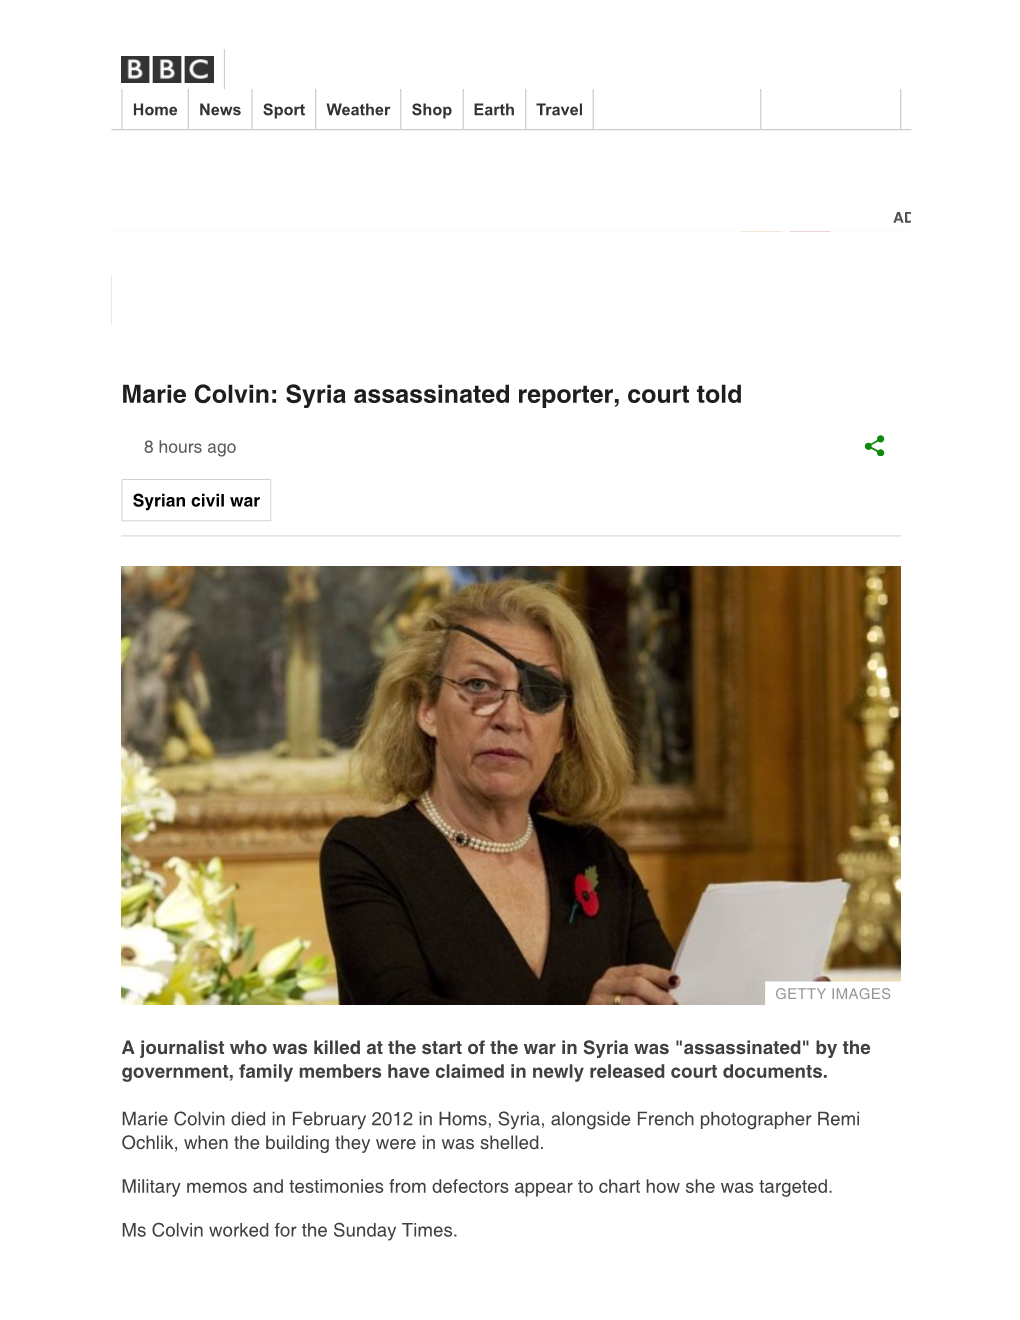 Marie Colvin: Syria Assassinated Reporter, Court Told